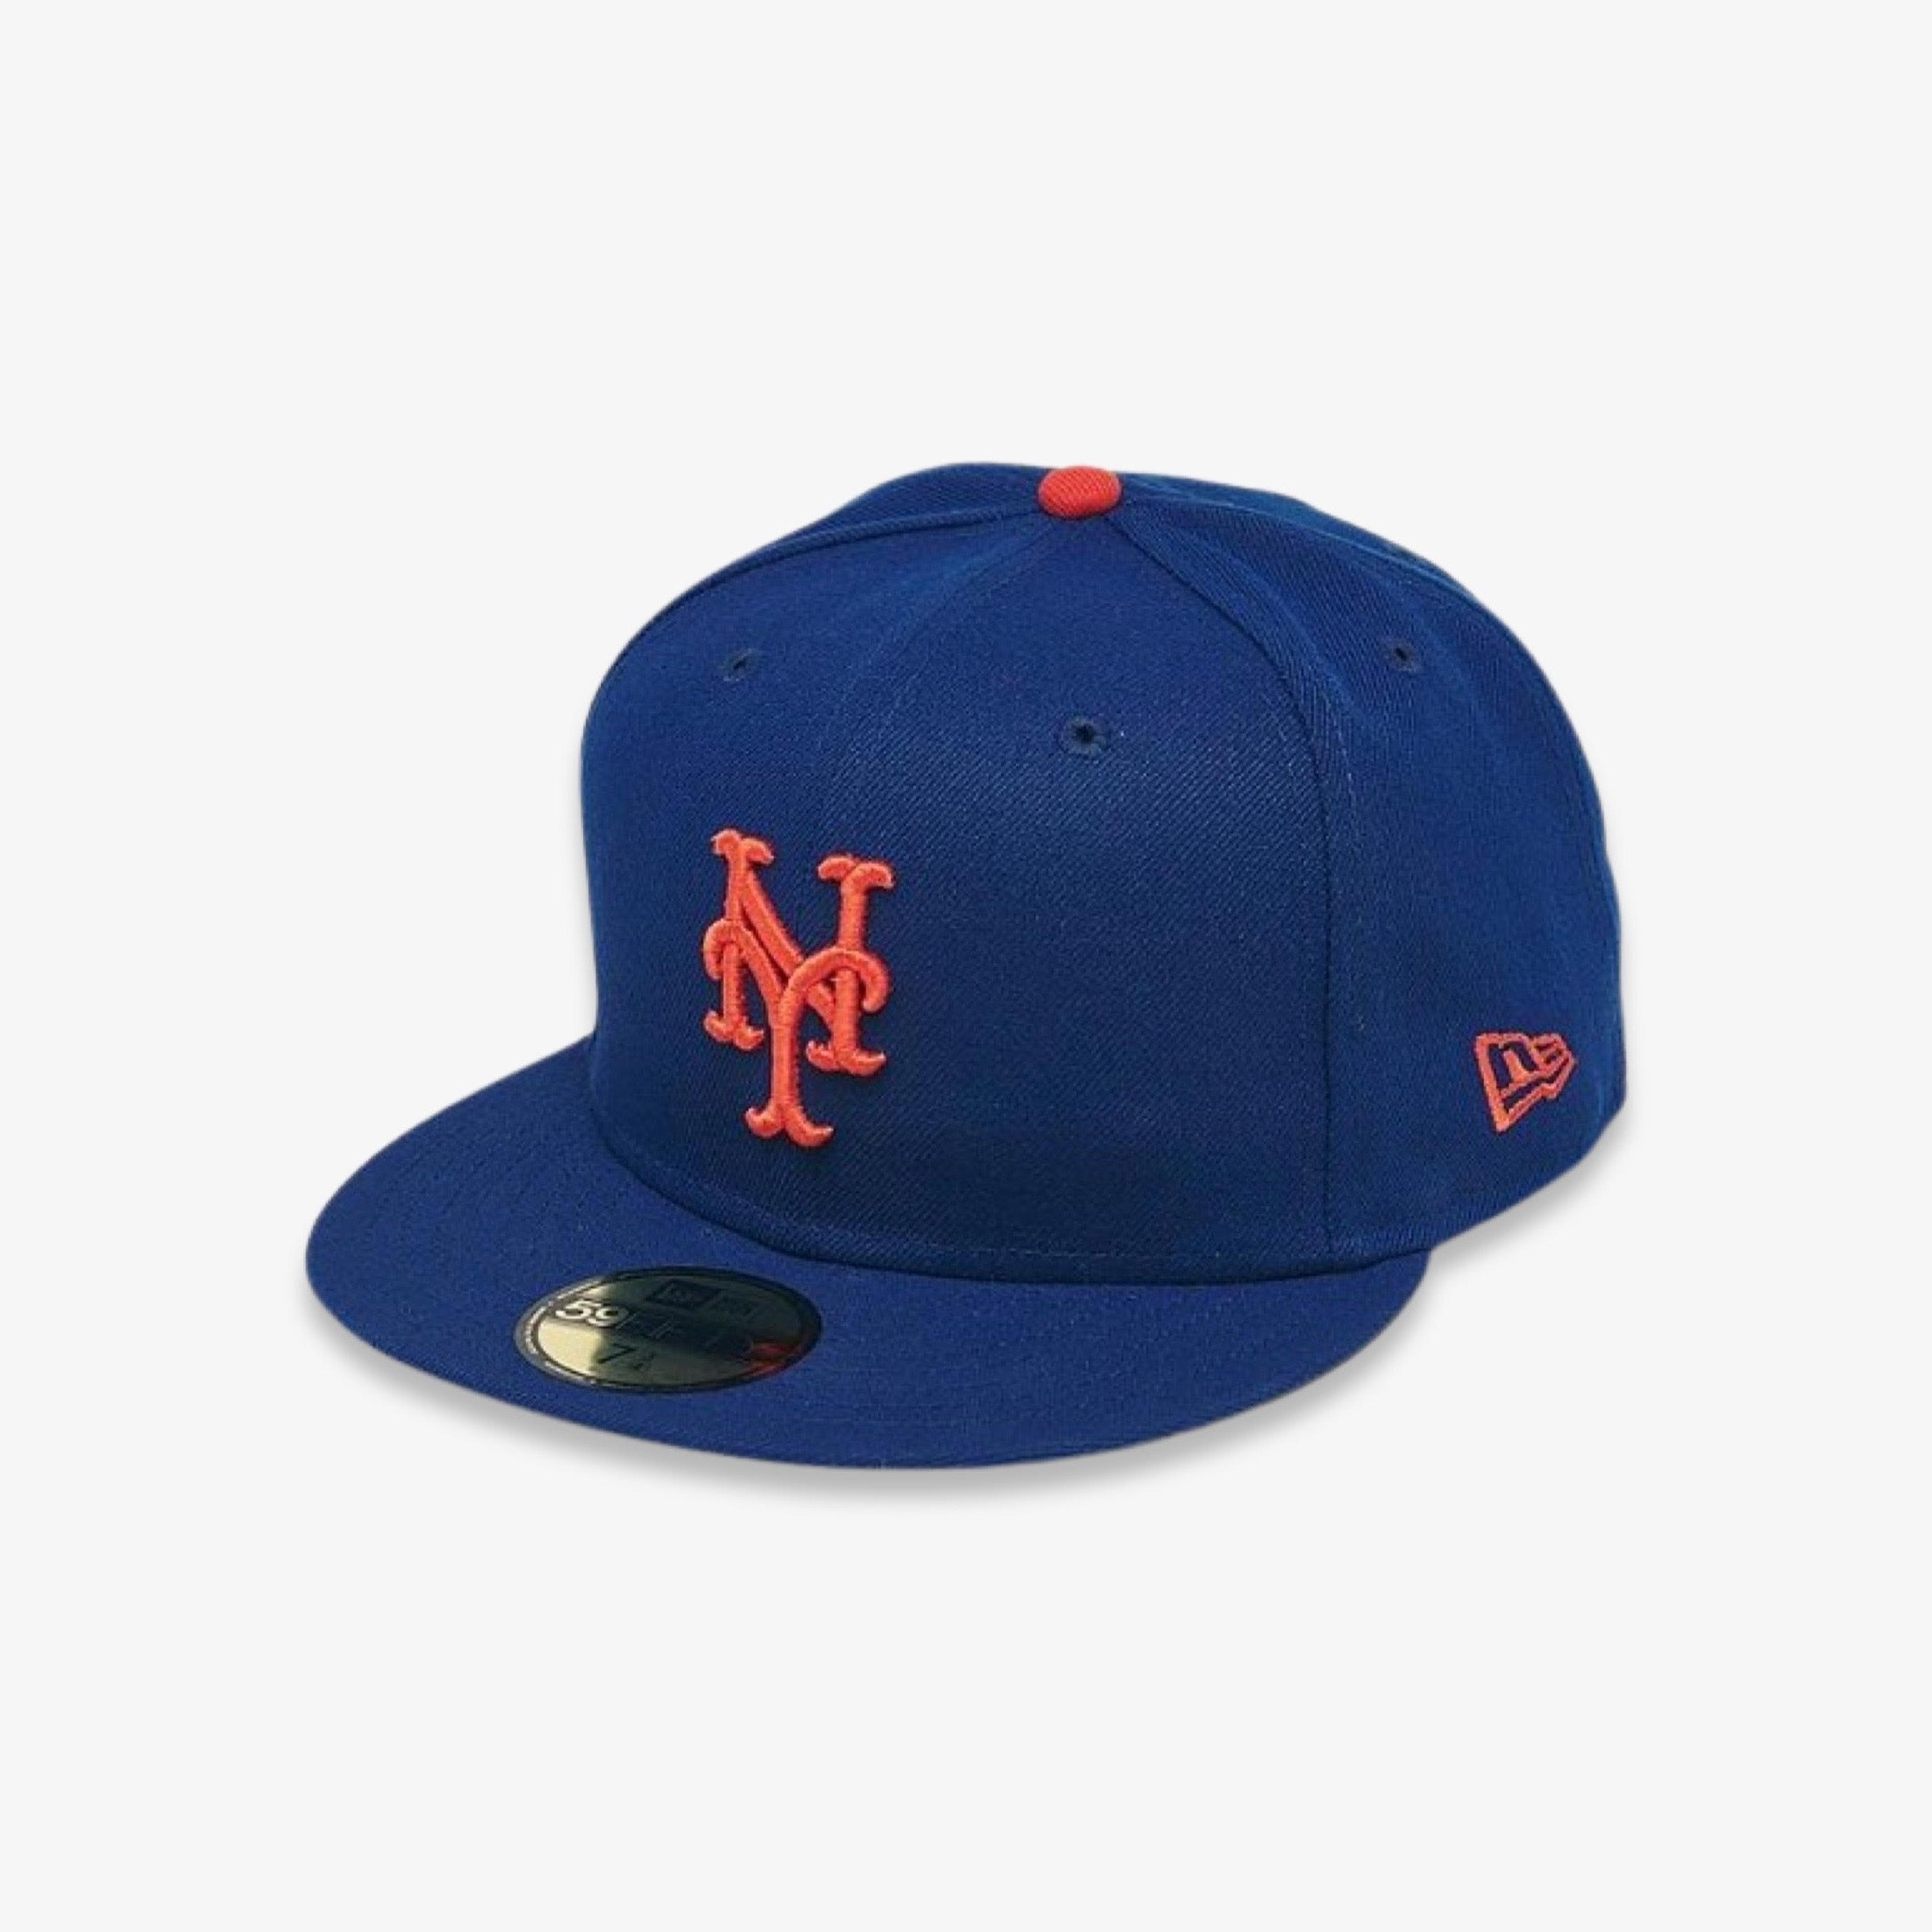 New Era x MLB 'New York Mets' 59Fifty Patch Fitted Hat SS17